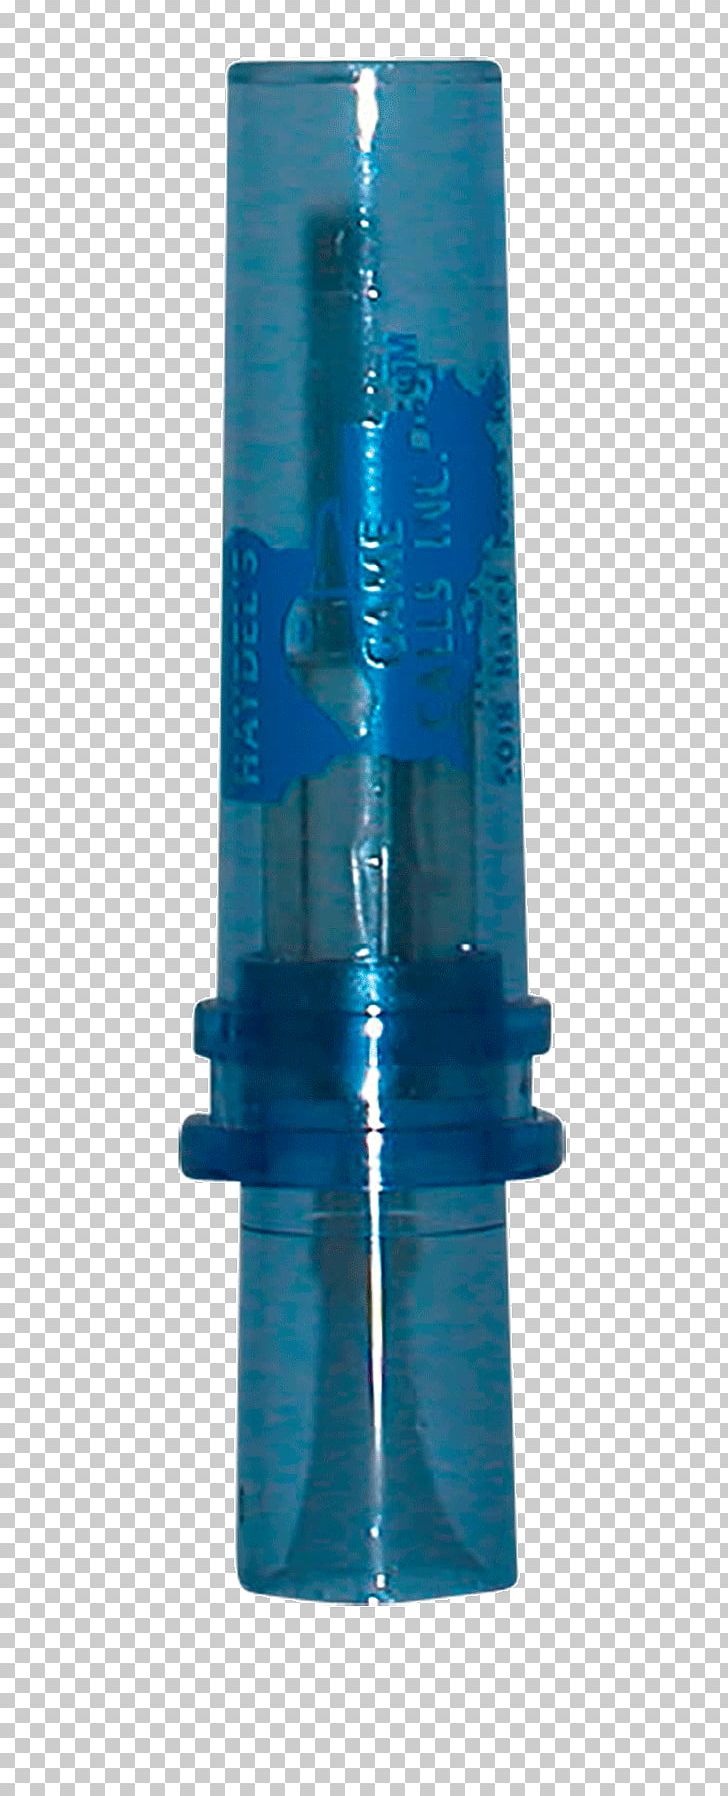 Bottle Plastic Water Cylinder PNG, Clipart, Bluewinged Teal, Bottle, Cylinder, Electric Blue, Objects Free PNG Download